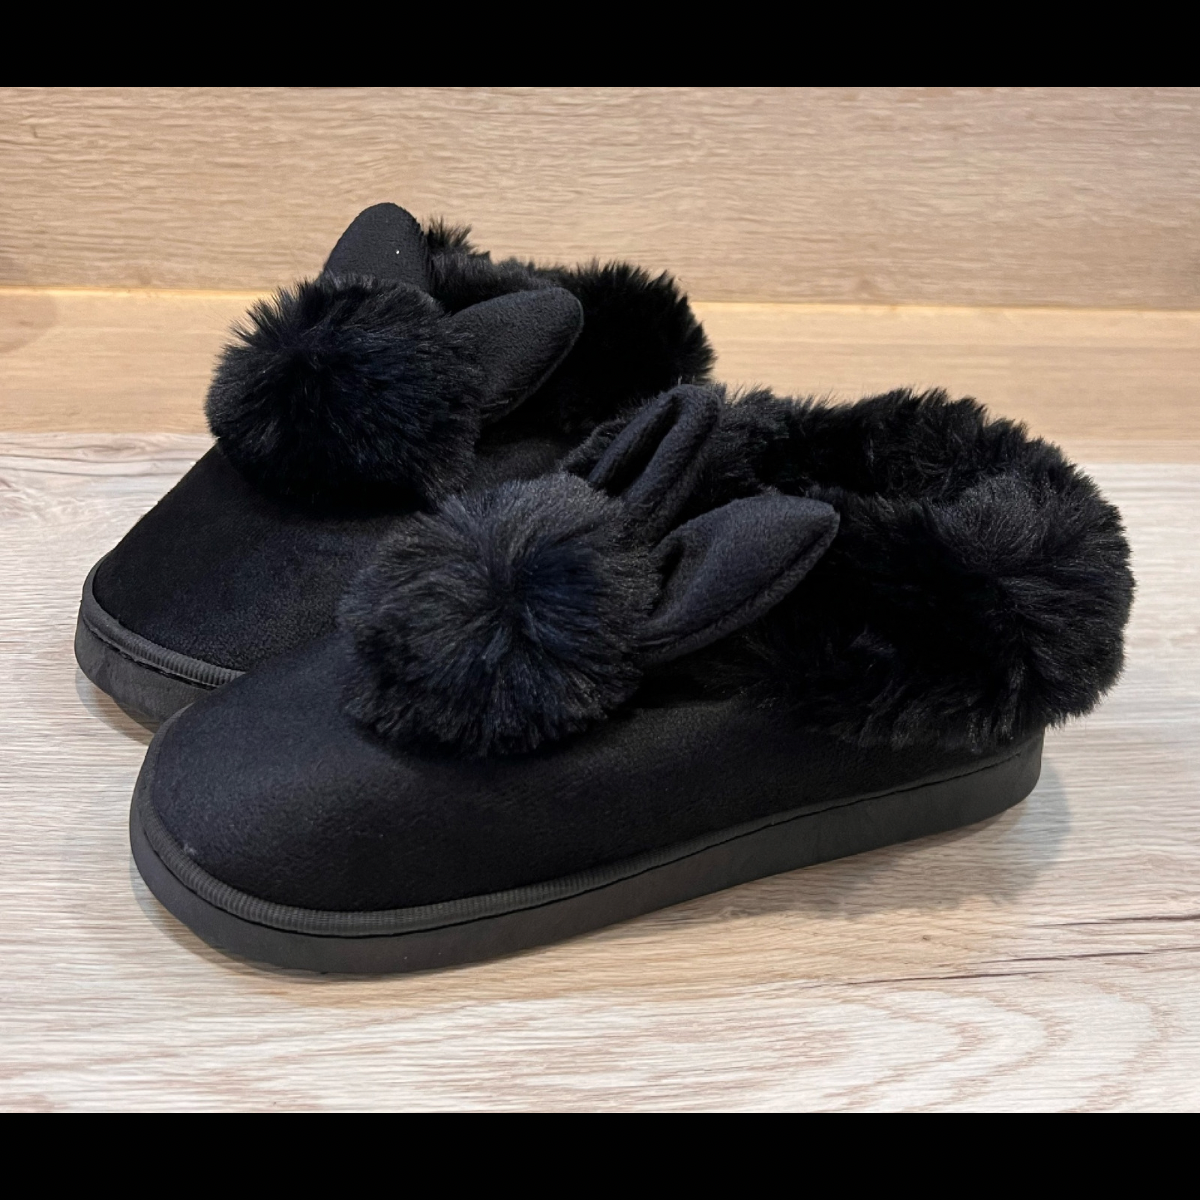 ROCKTHOSECURVES BLACK FULL FOTT SLIPPERS WITH BUNY EARS AND OUTDORR SOLE